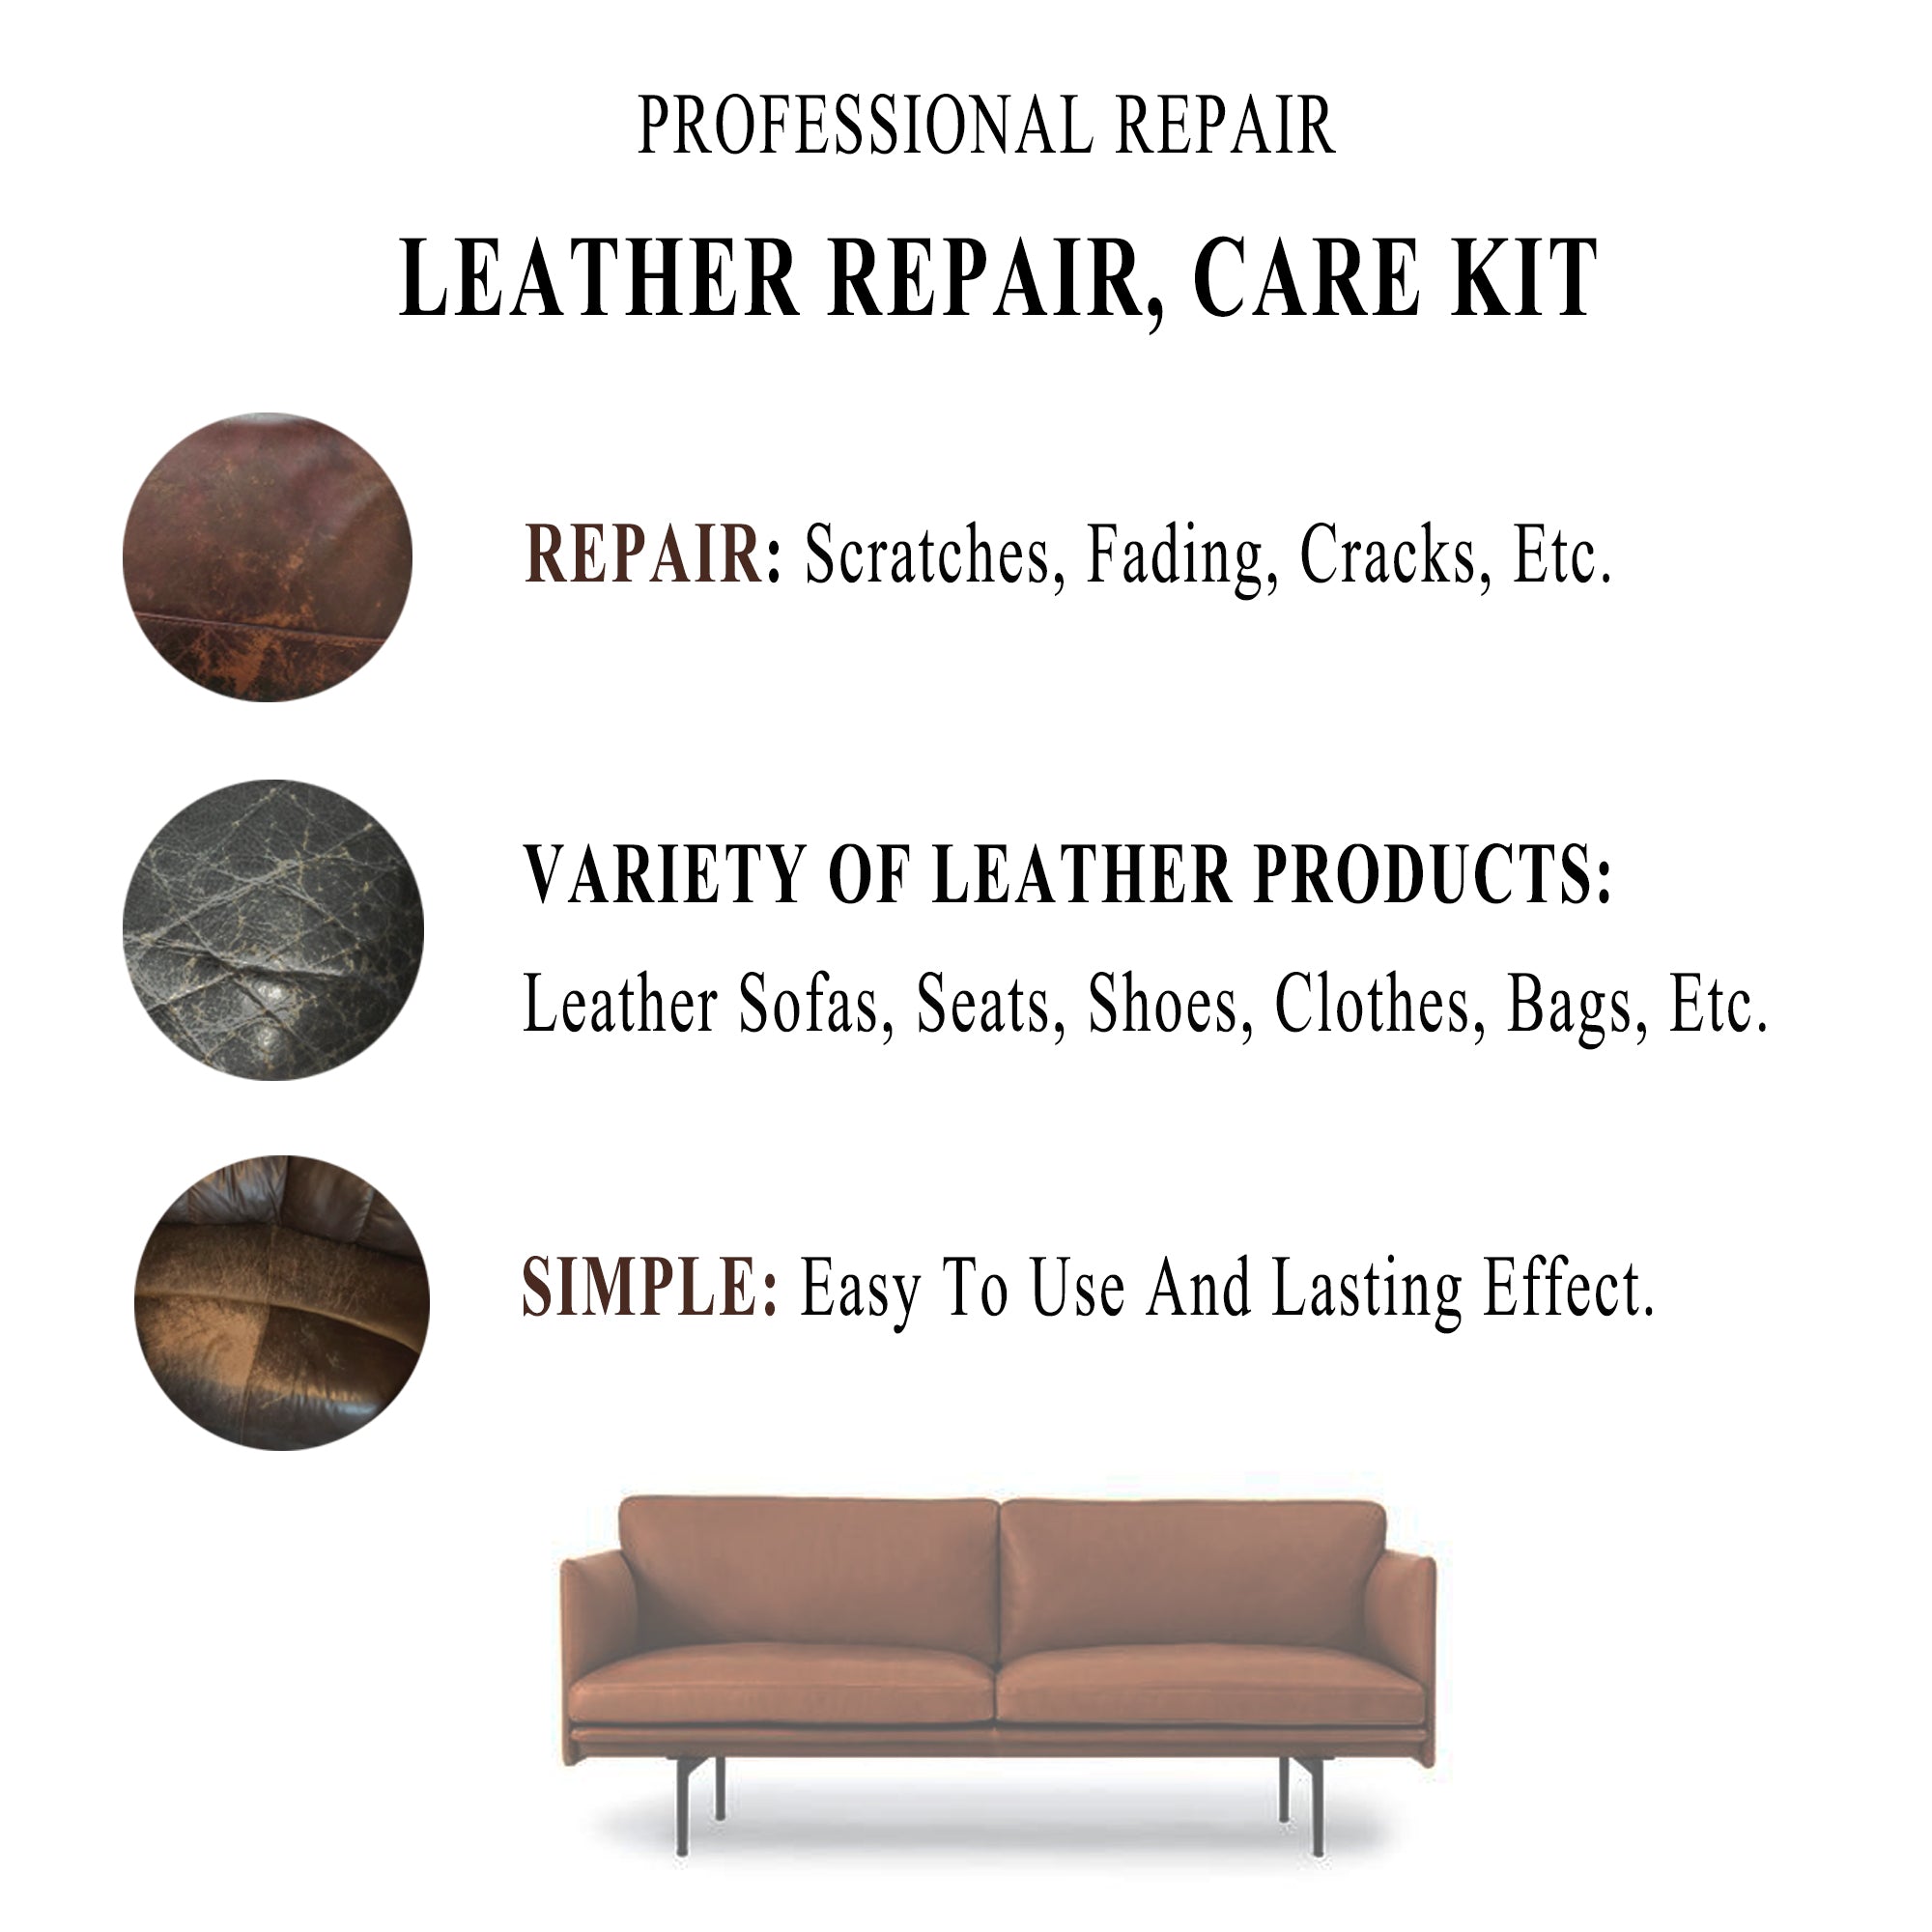 Brown Leather Repair Kits for Couches - Leather Color Usedr for Furniture,  Car Seats, Furniture - Leather Recoloring Balm Leather Repair Cream Leather